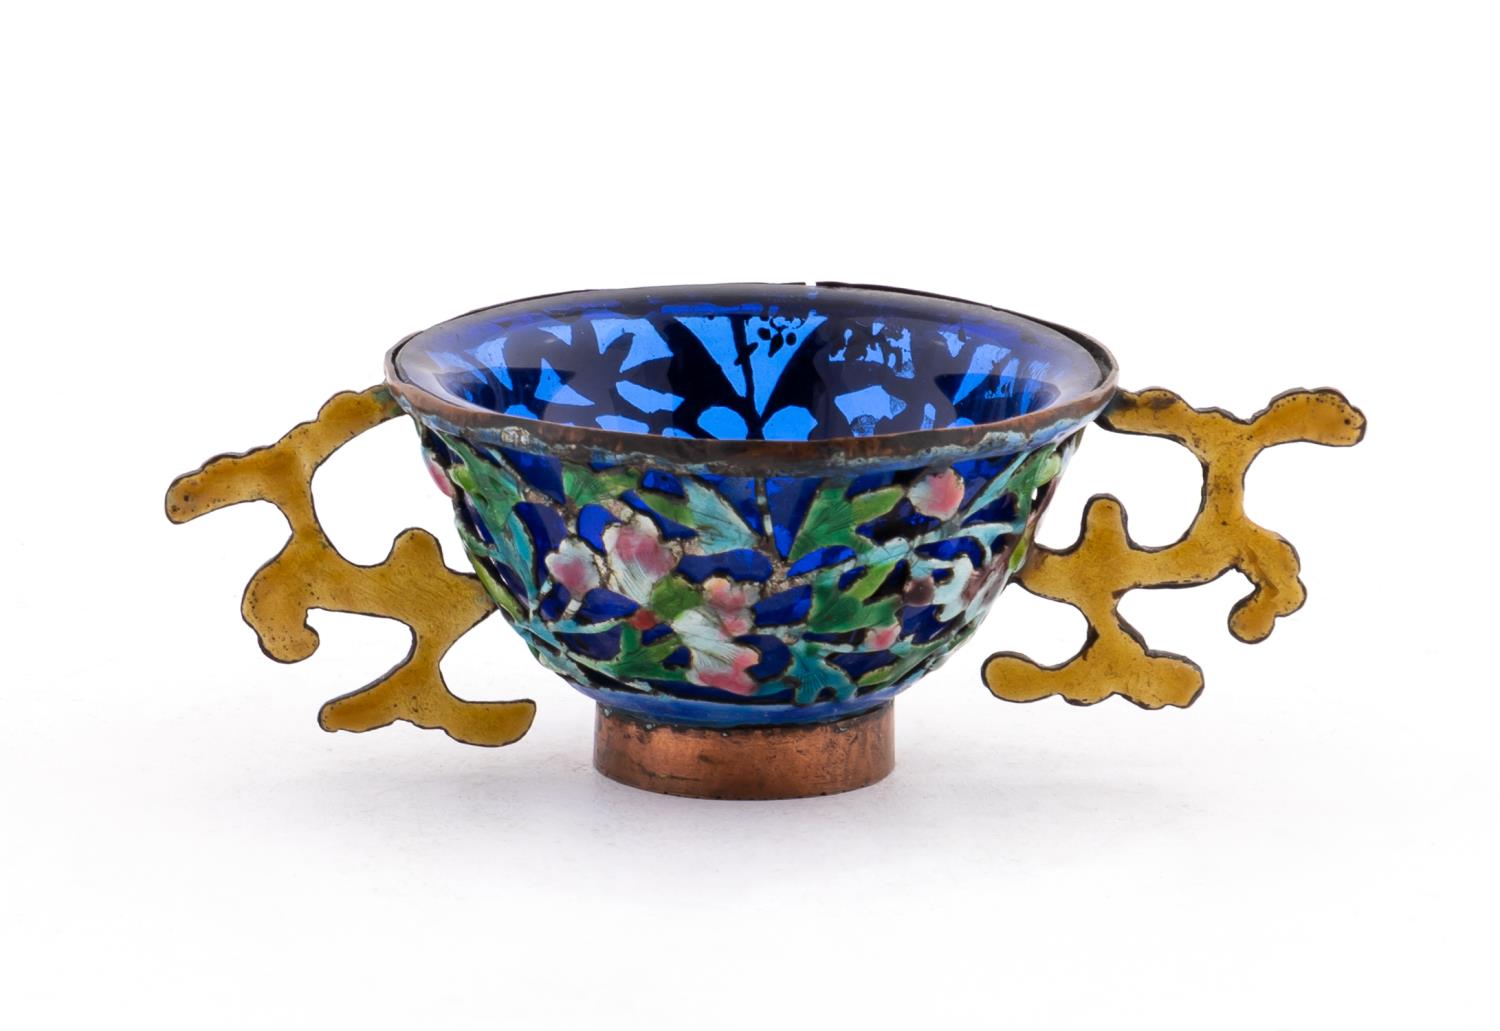 CHINESE ENAMELED WINE CUP WITH 35e03c